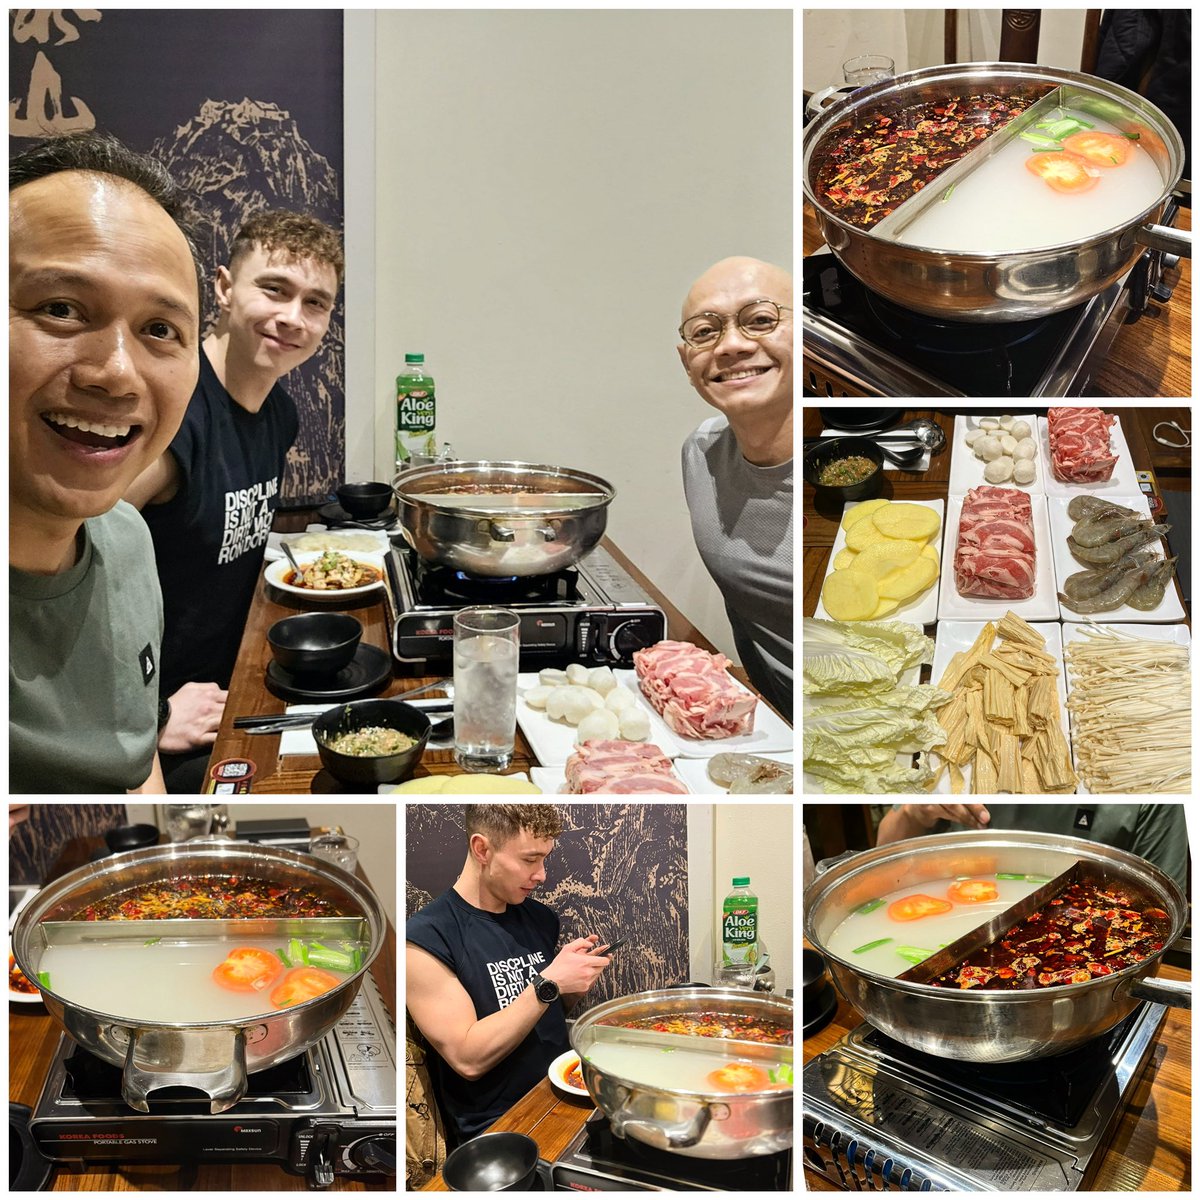 This was more of a #hotpot induction for our friend… All you can eat and we ate a lot on Moiz’s last night in #London. #angelislington #atasteofchina #awesome #chinesefood #dinner #eatingout #londonfood